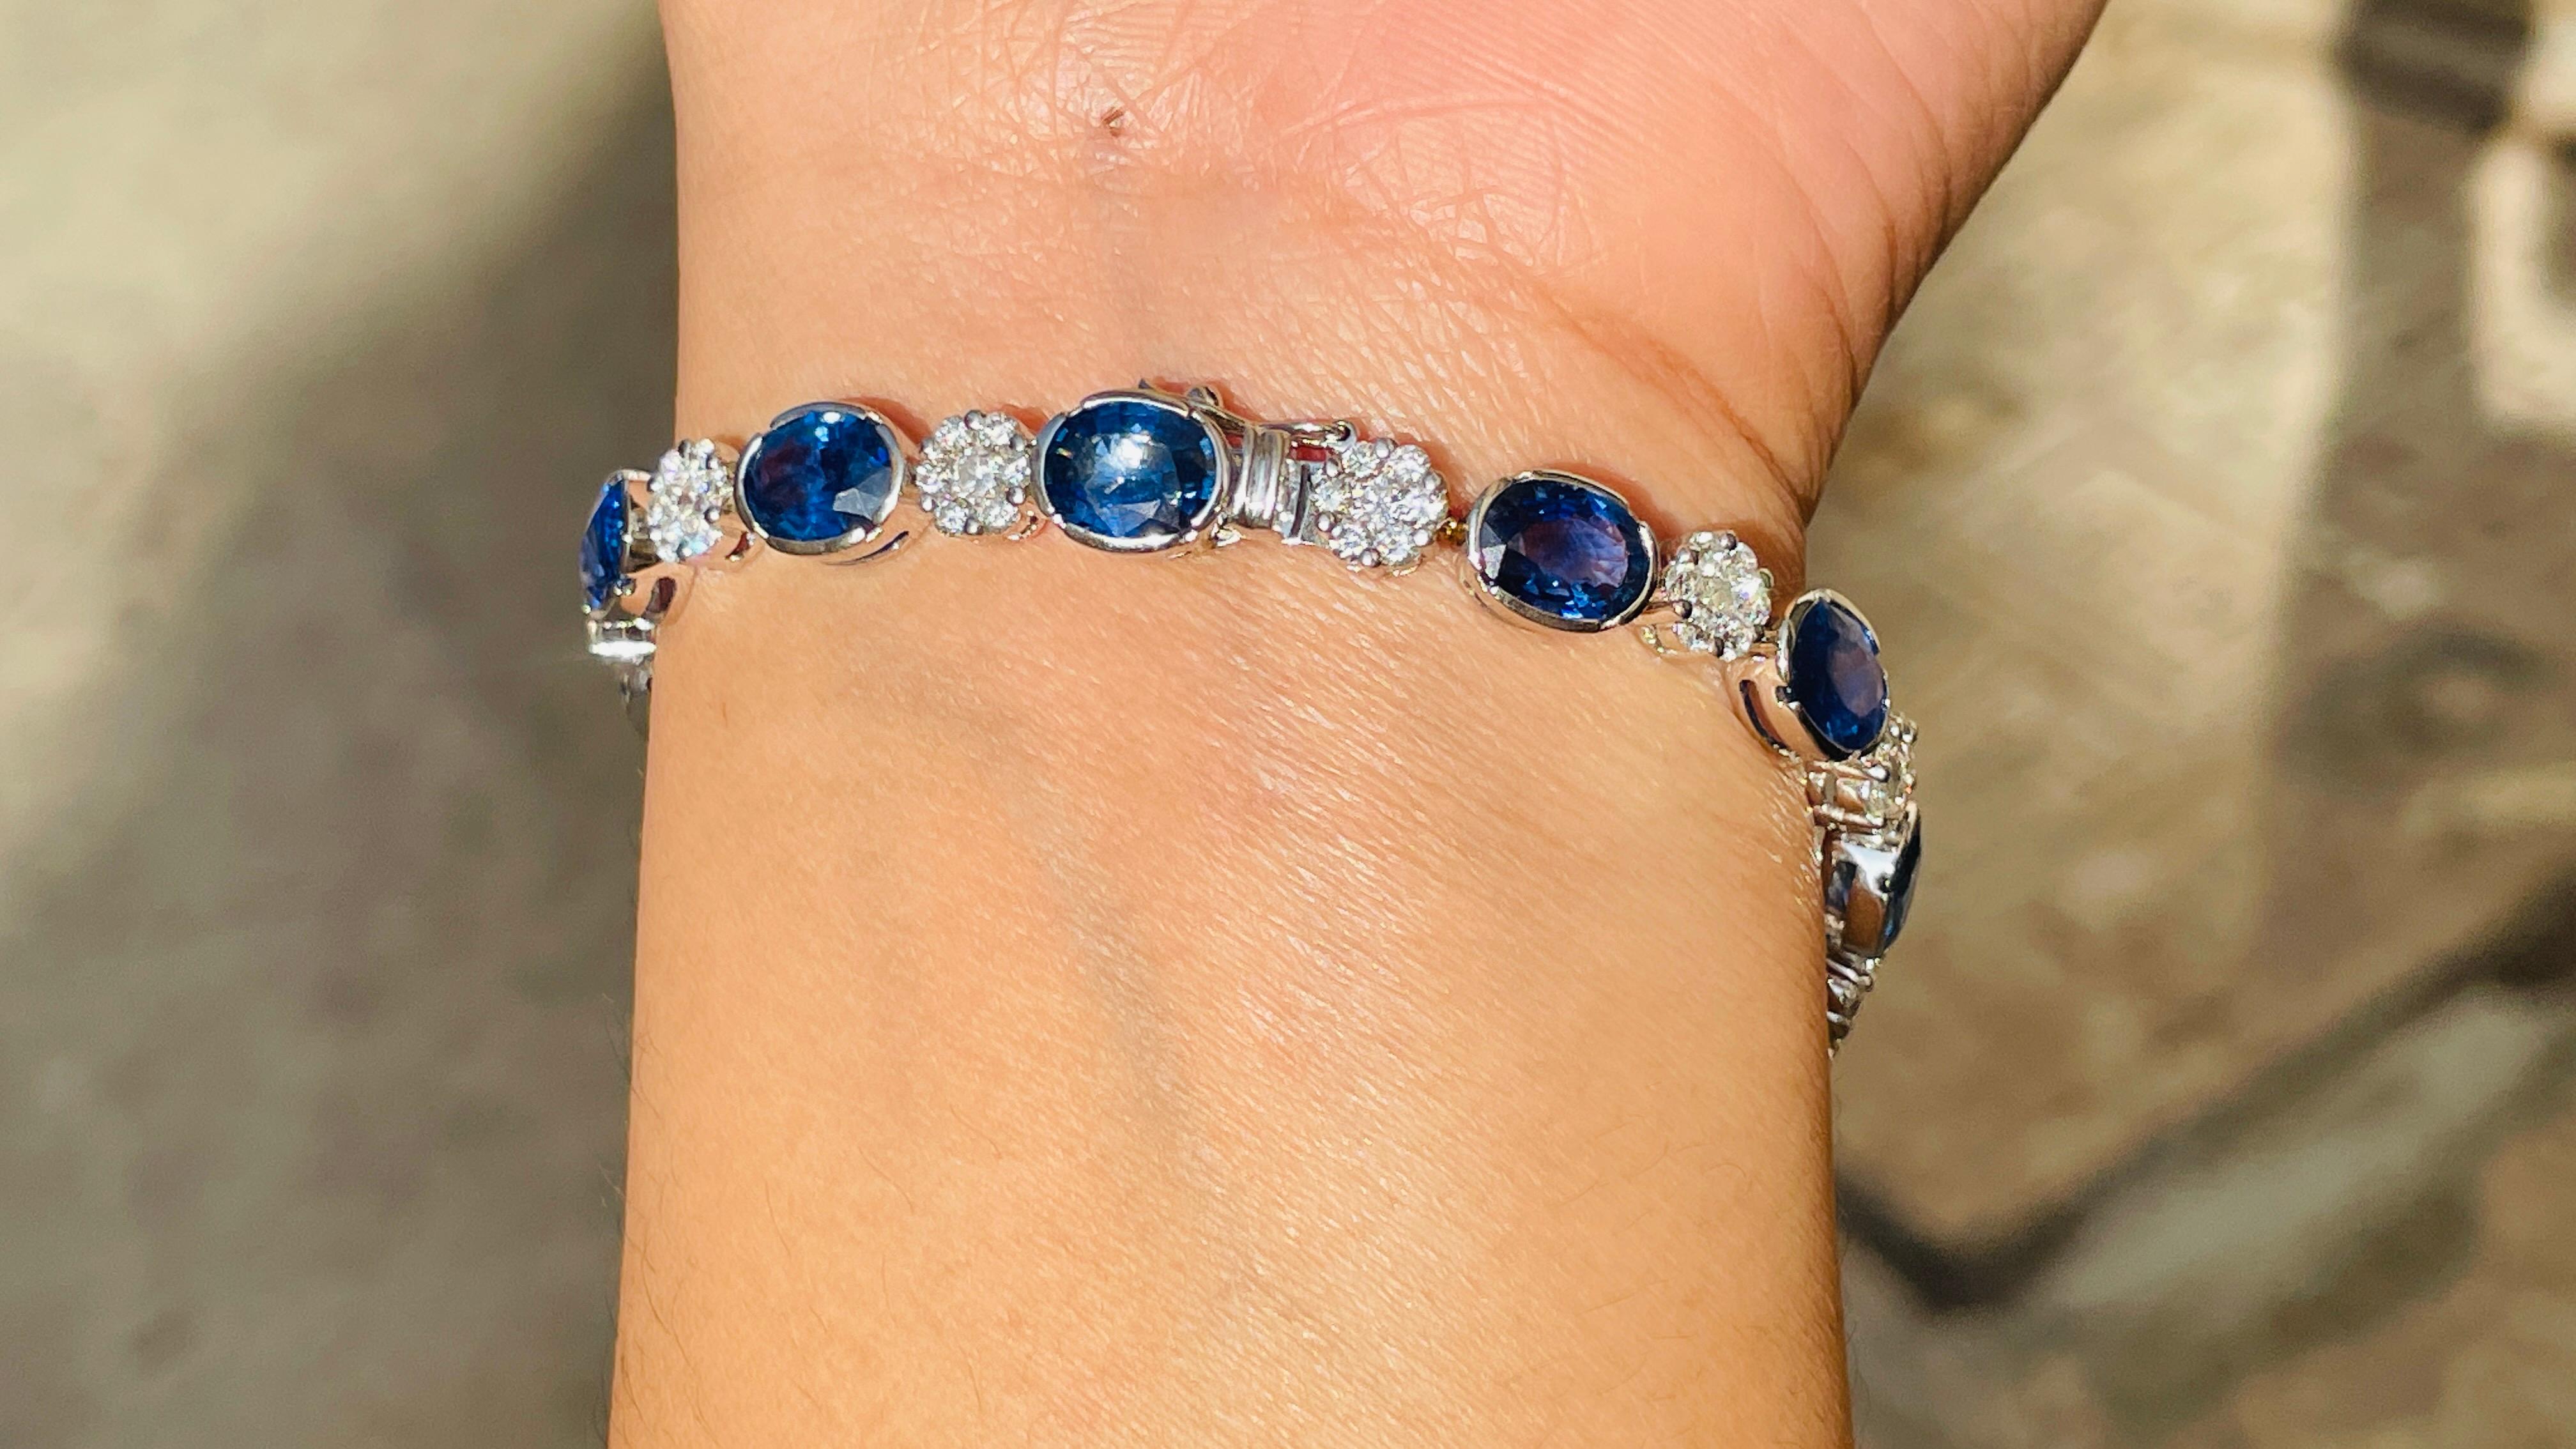 Blue Sapphire and Diamond bracelet in 18K Gold. It has a perfect oval cut gemstone to make you stand out on any occasion or an event.
A tennis bracelet is an essential piece of jewelry when it comes to your wedding day. The sleek and elegant style